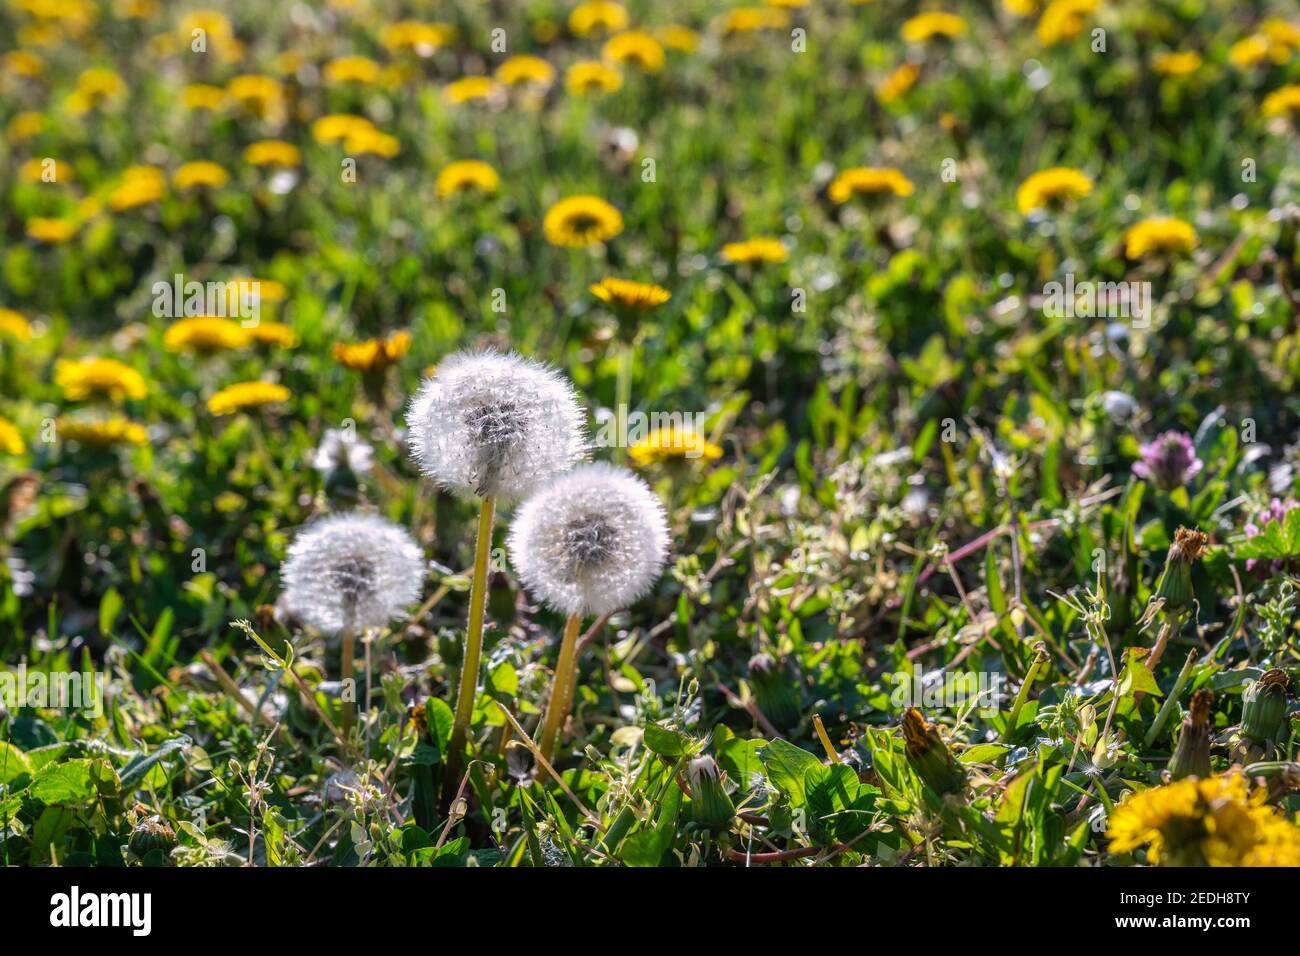 Field with yellow dandelions and full bloom dandelions in spring season Stock Photo